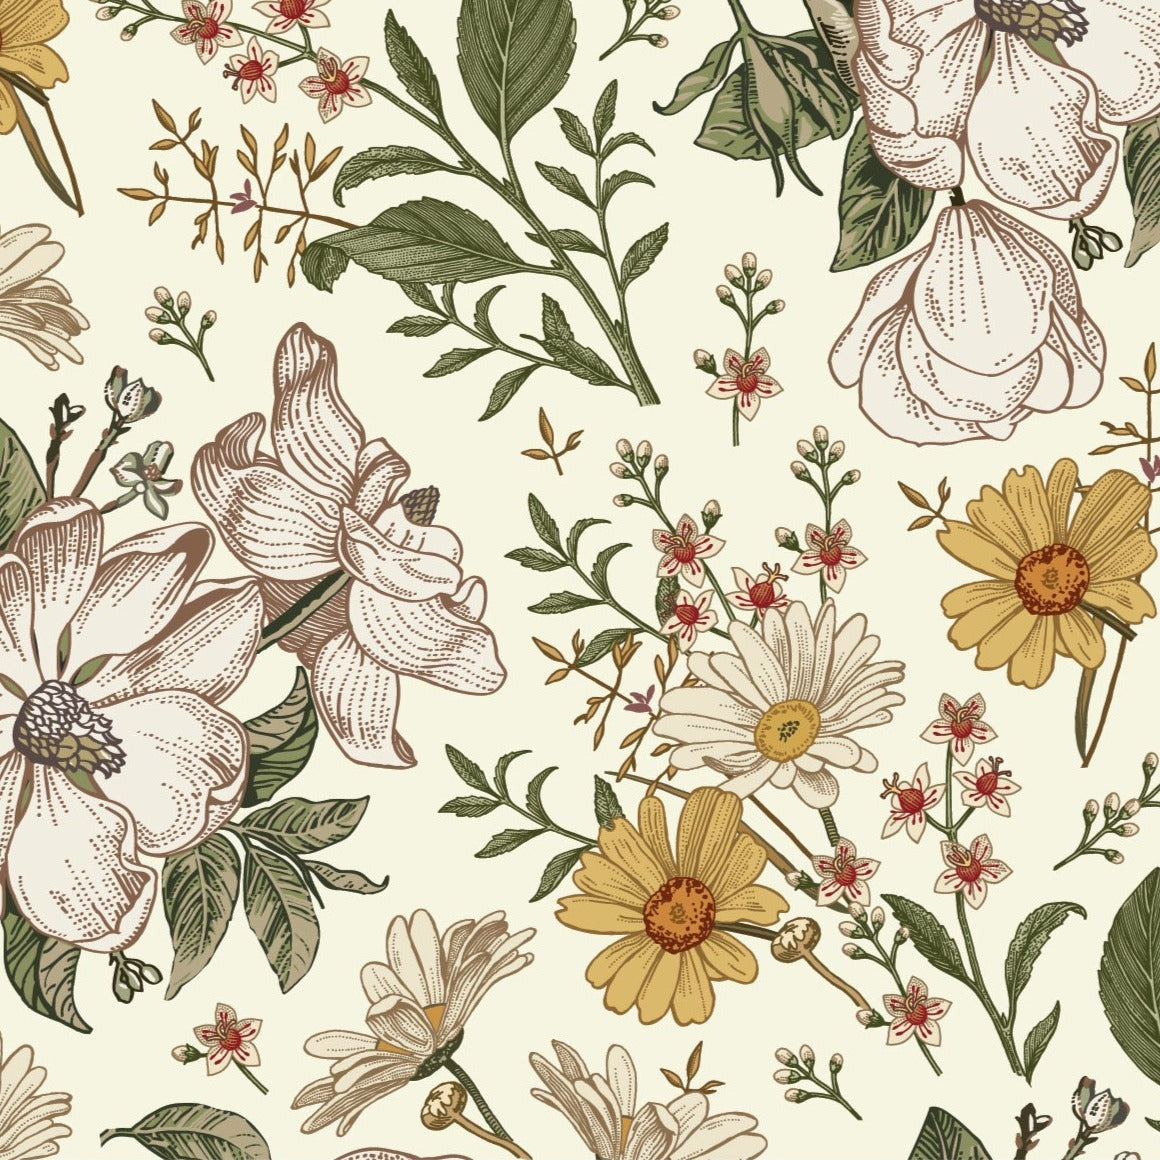 A detailed view of the Floral Wallpaper - Sunny, highlighting its intricate pattern of large magnolias and daisies intertwined with delicate greenery, rendered in a charming hand-illustrated style that brings a touch of nature's beauty indoors.